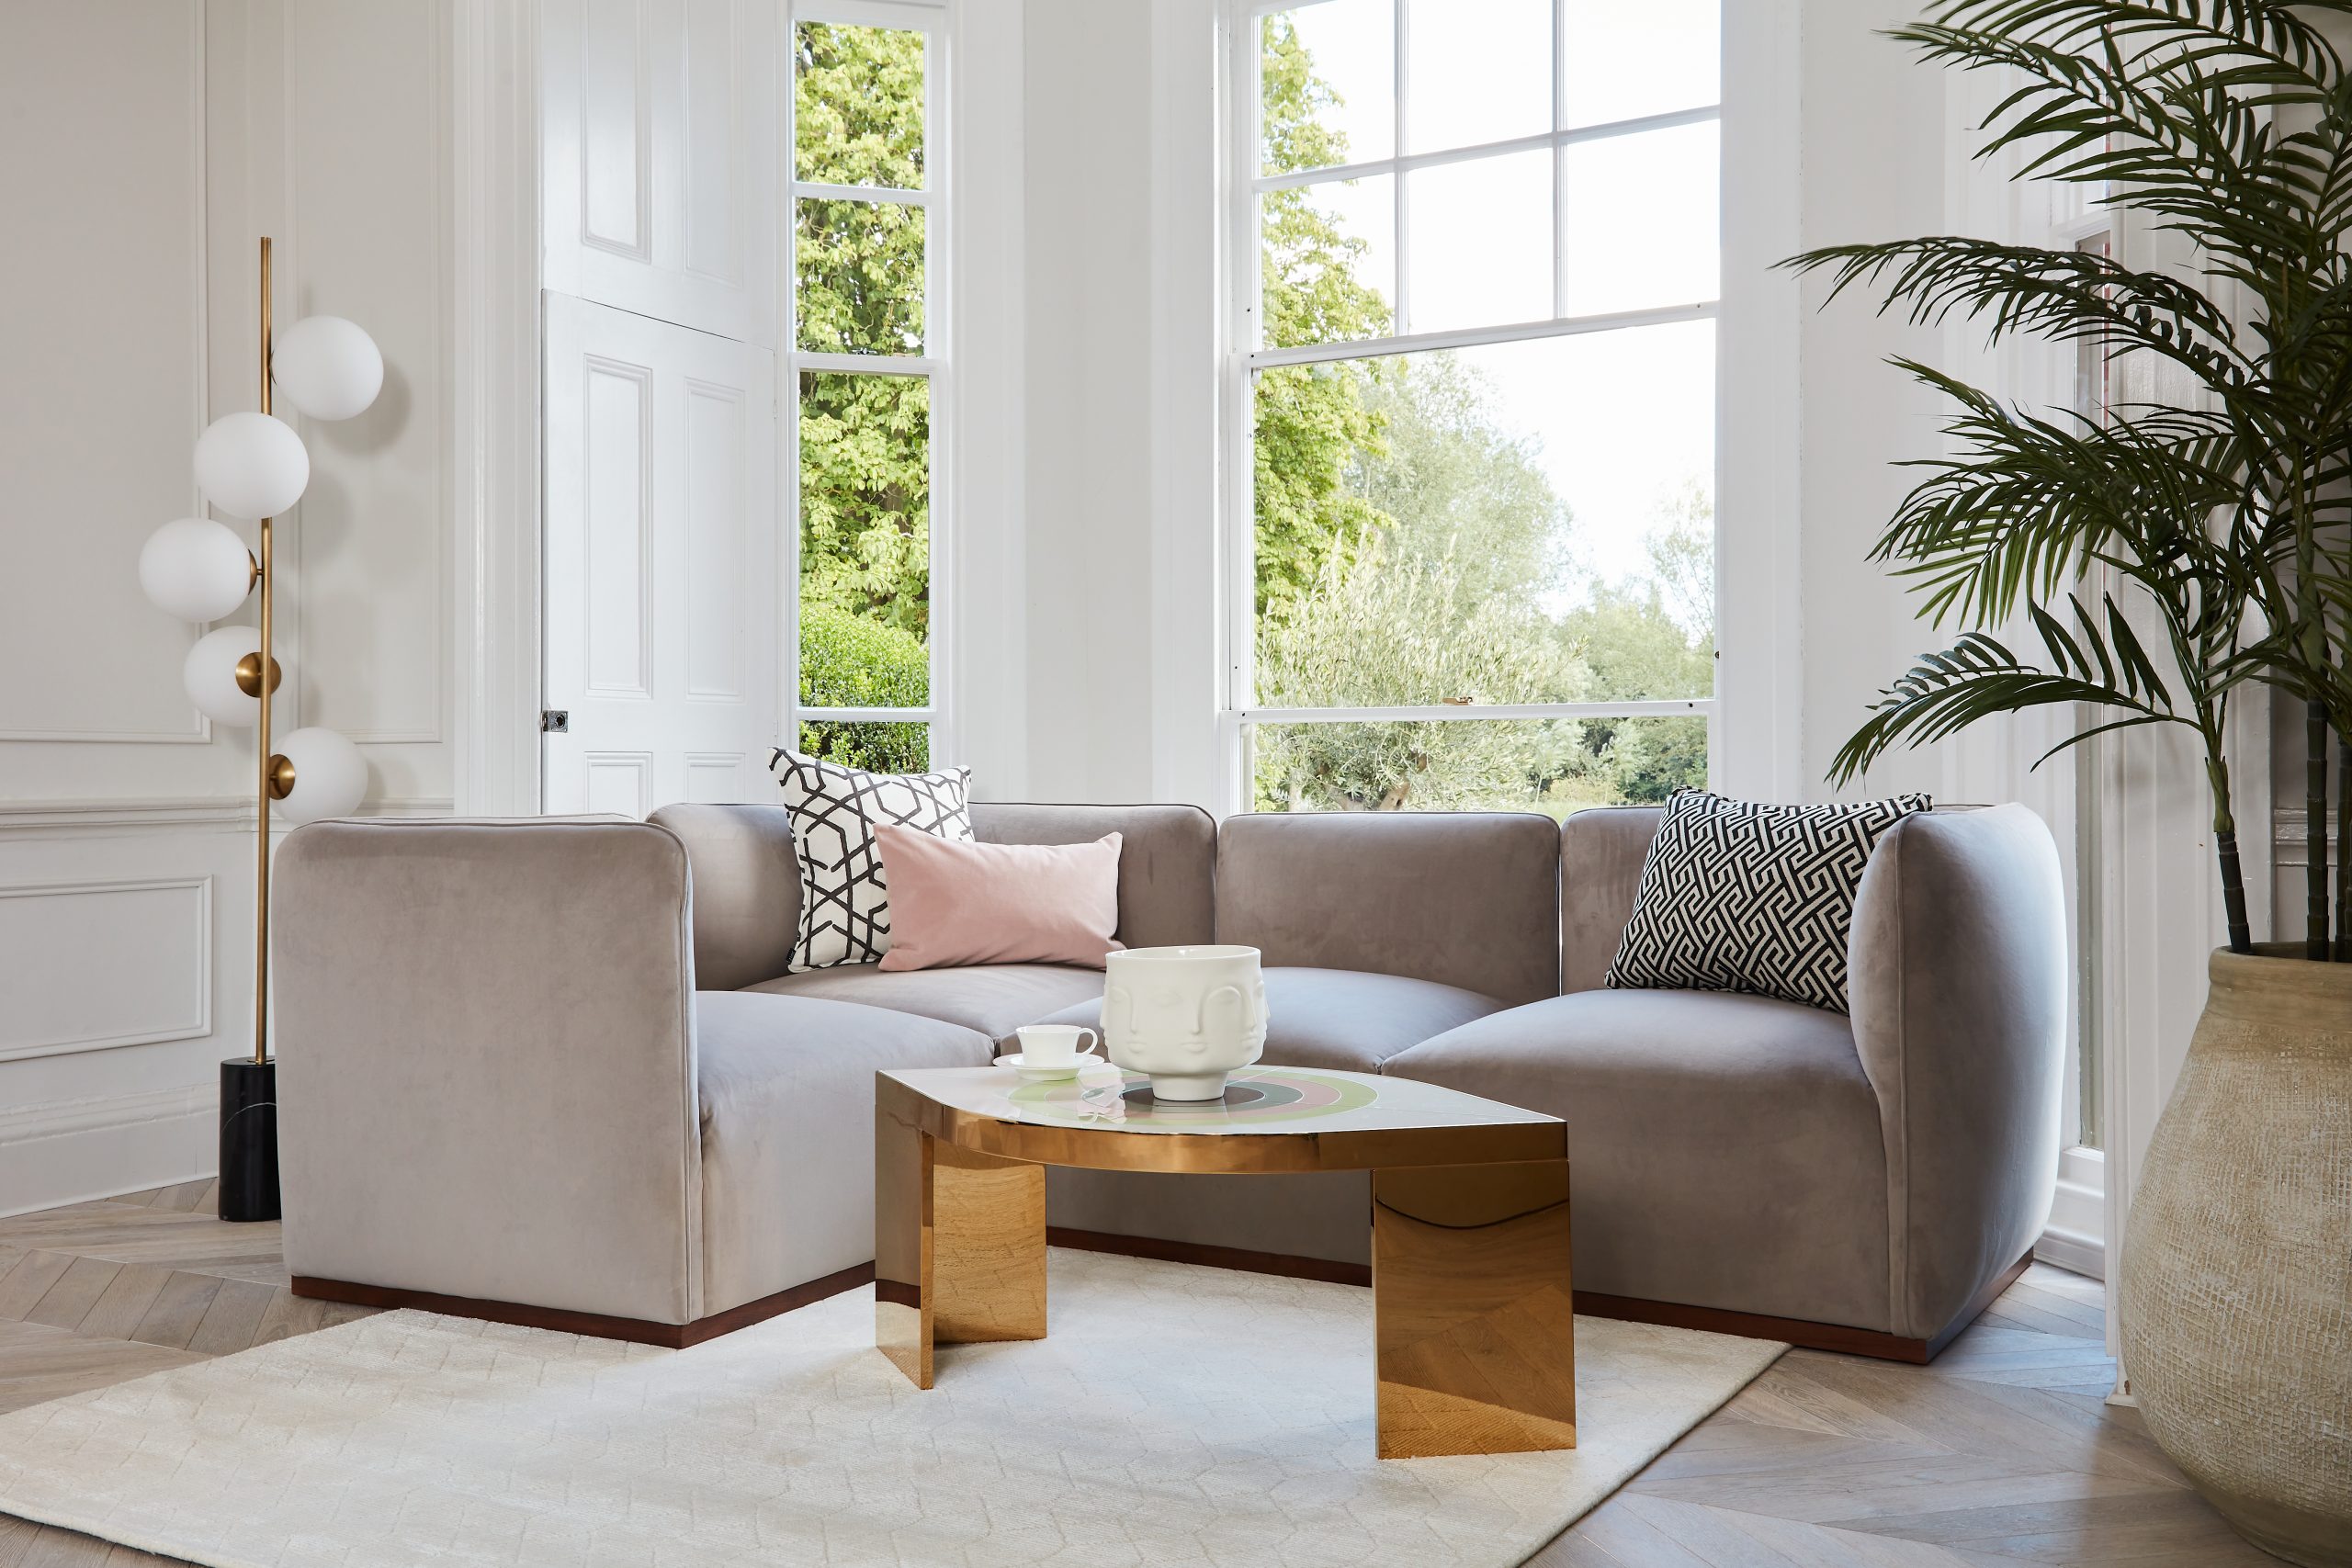 A beautiful grey velvet sofa in a living room lifestyle shot
